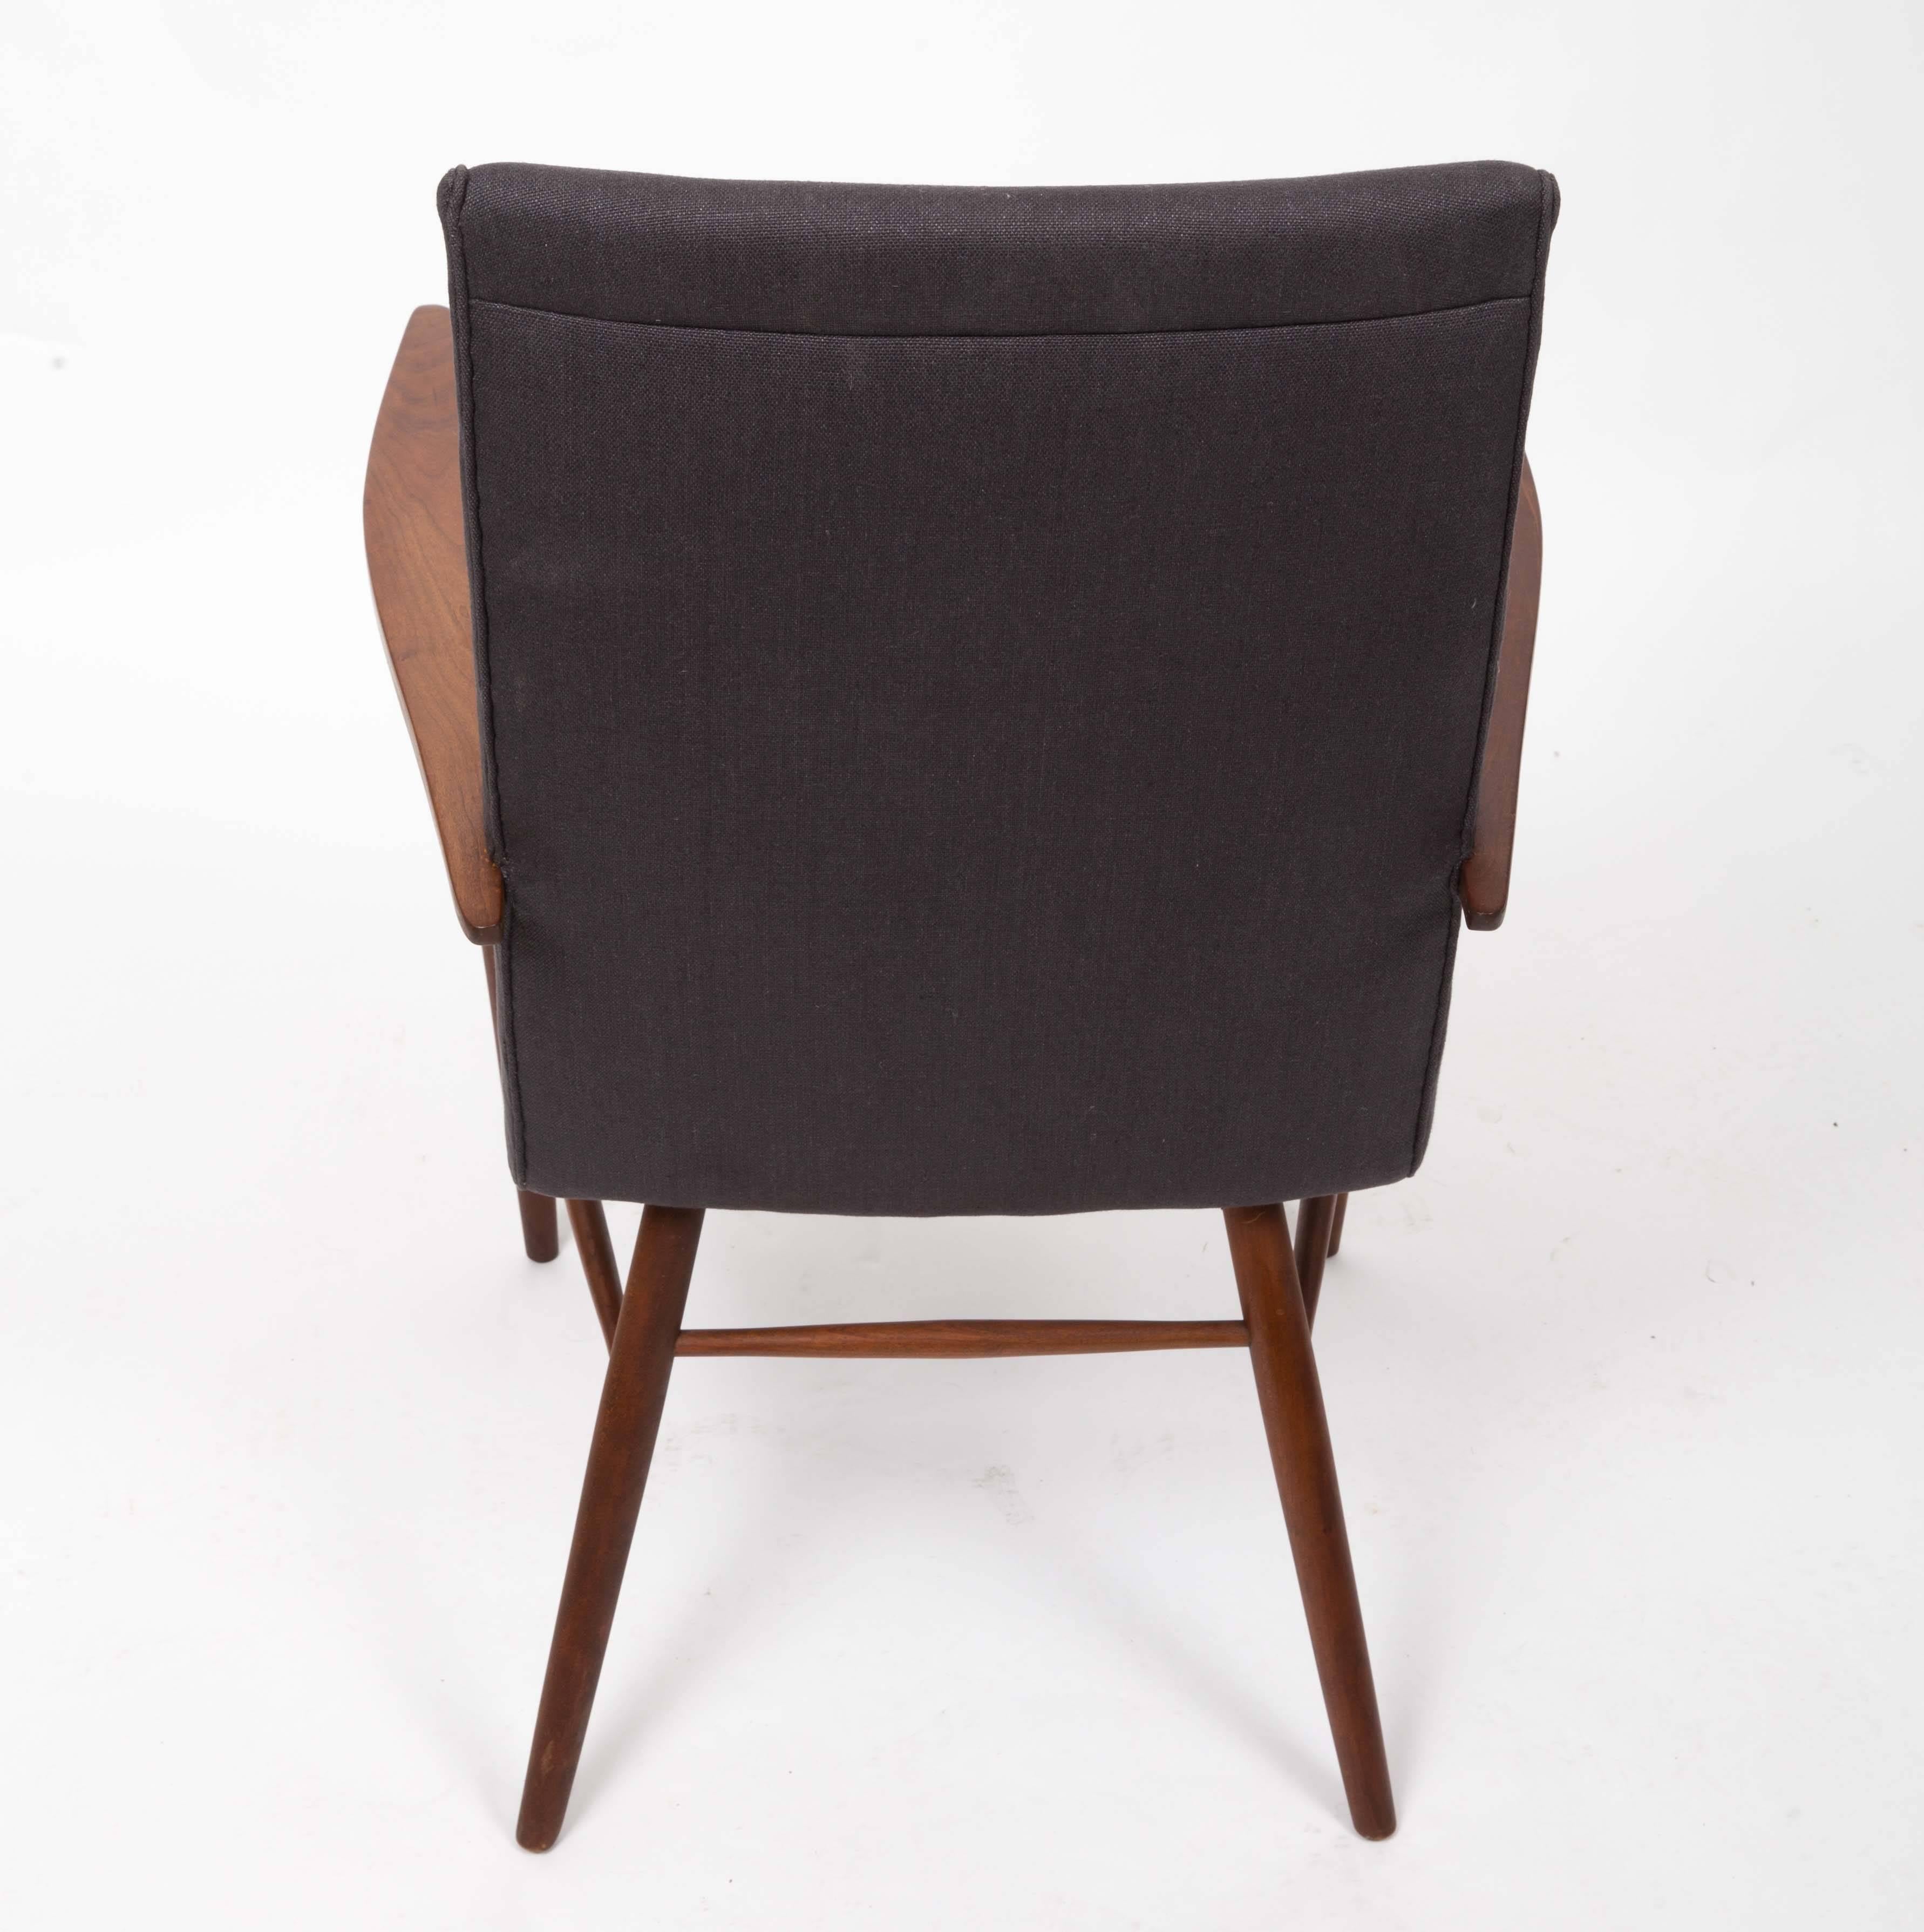 Upholstered Dining Chair by George Nakashima for Widdicomb 1